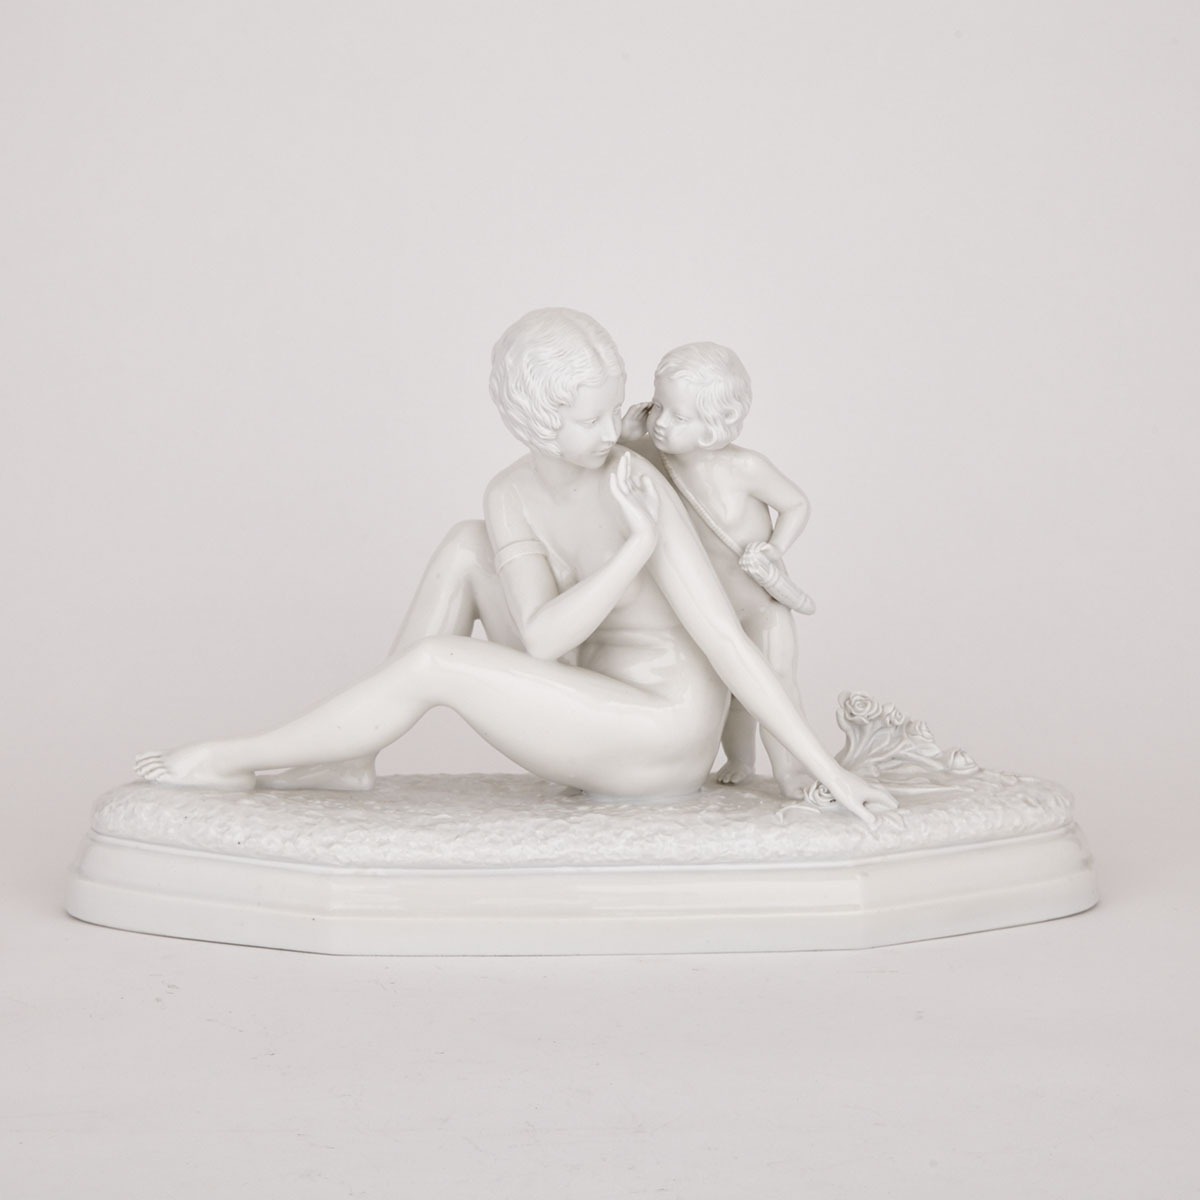 Villenauxe White Glazed Group of a Young Woman with Cupid, Bohumil Rezl, 20th century